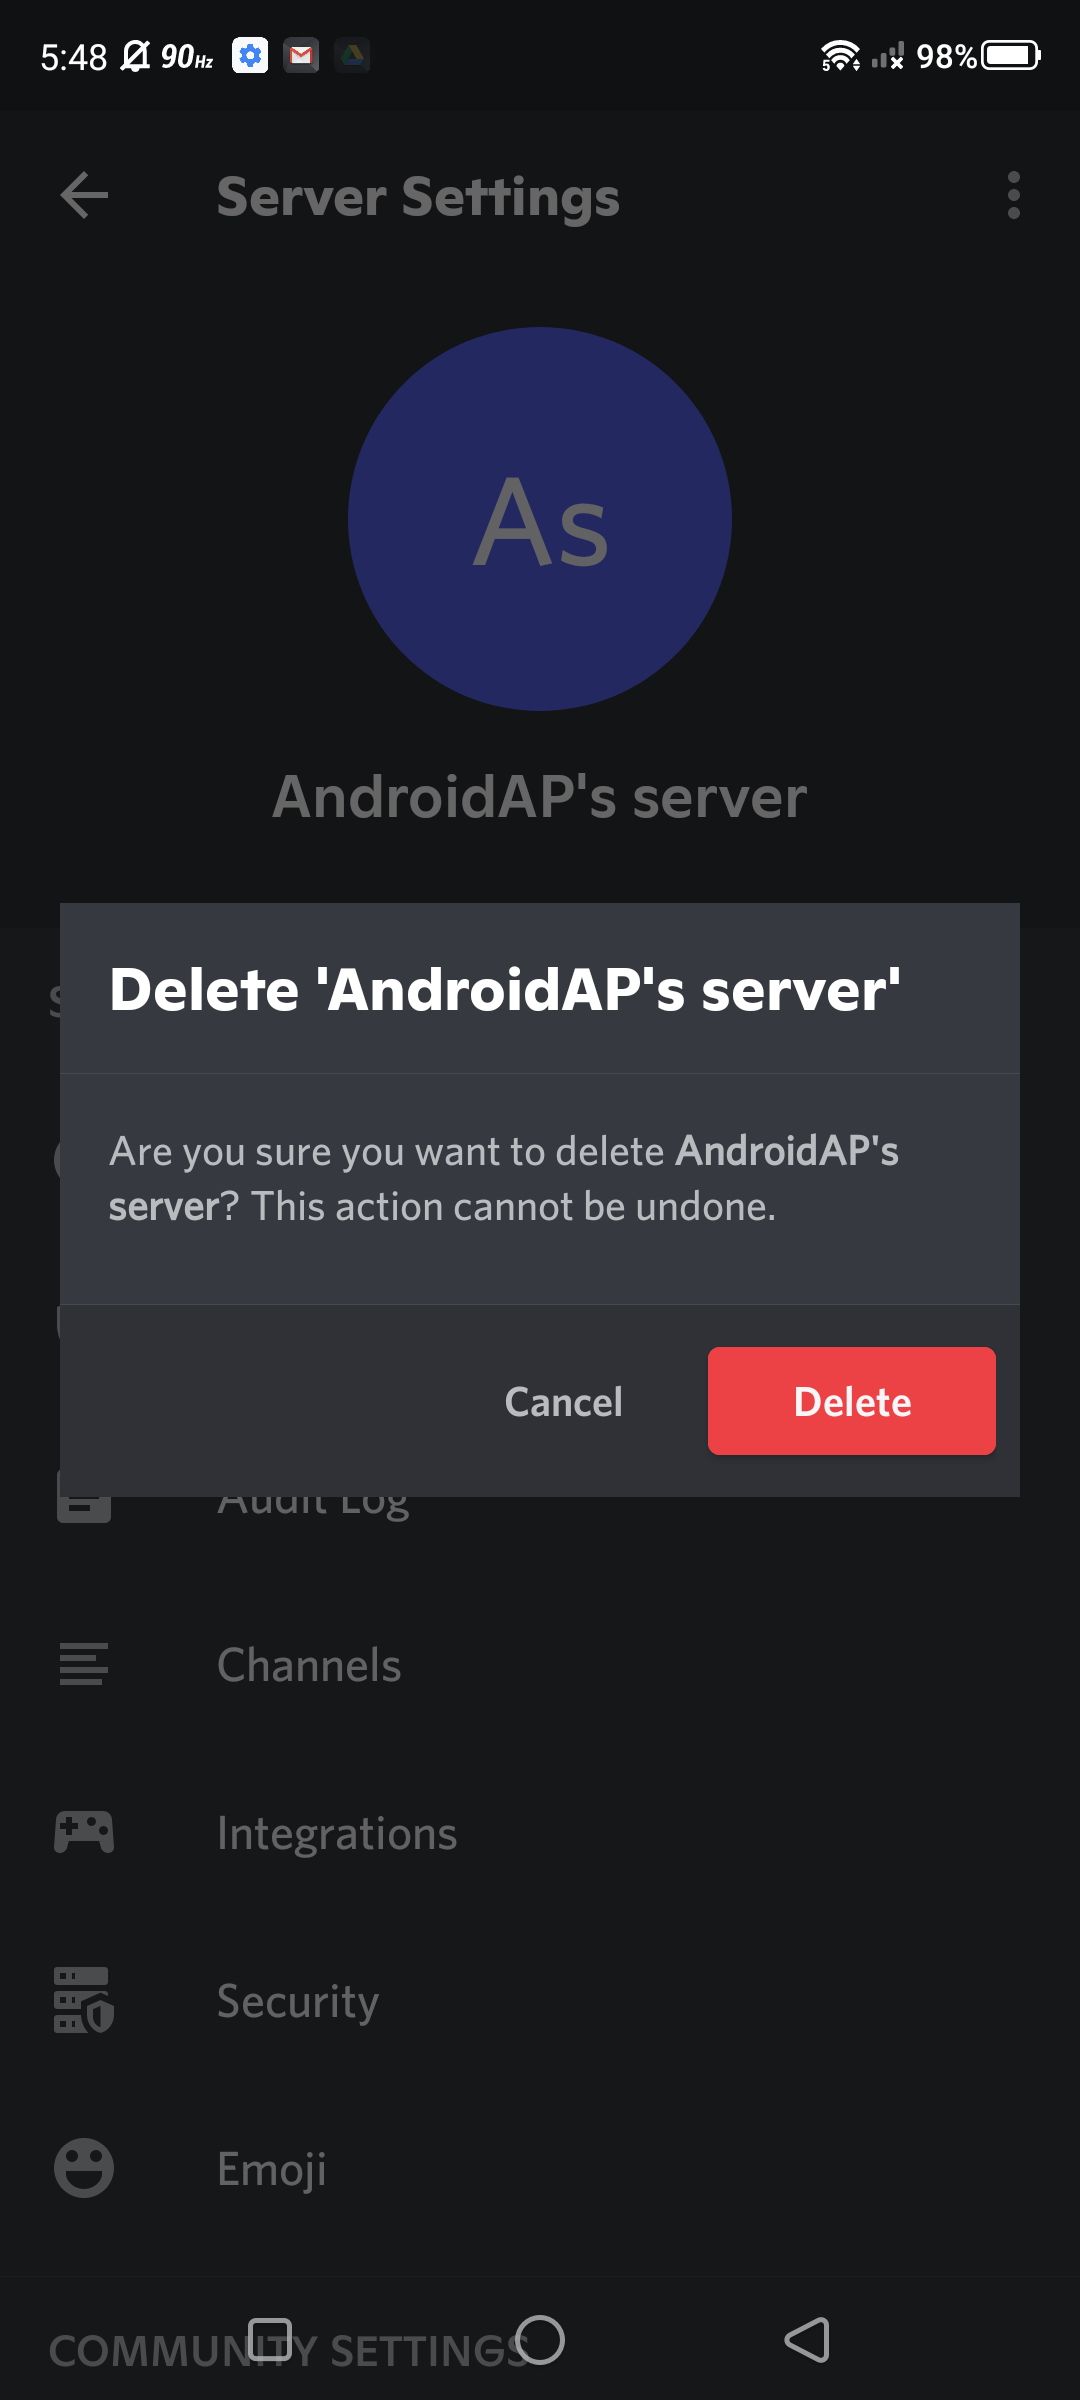 Screenshot of confirming the server delete on the Discord Android app